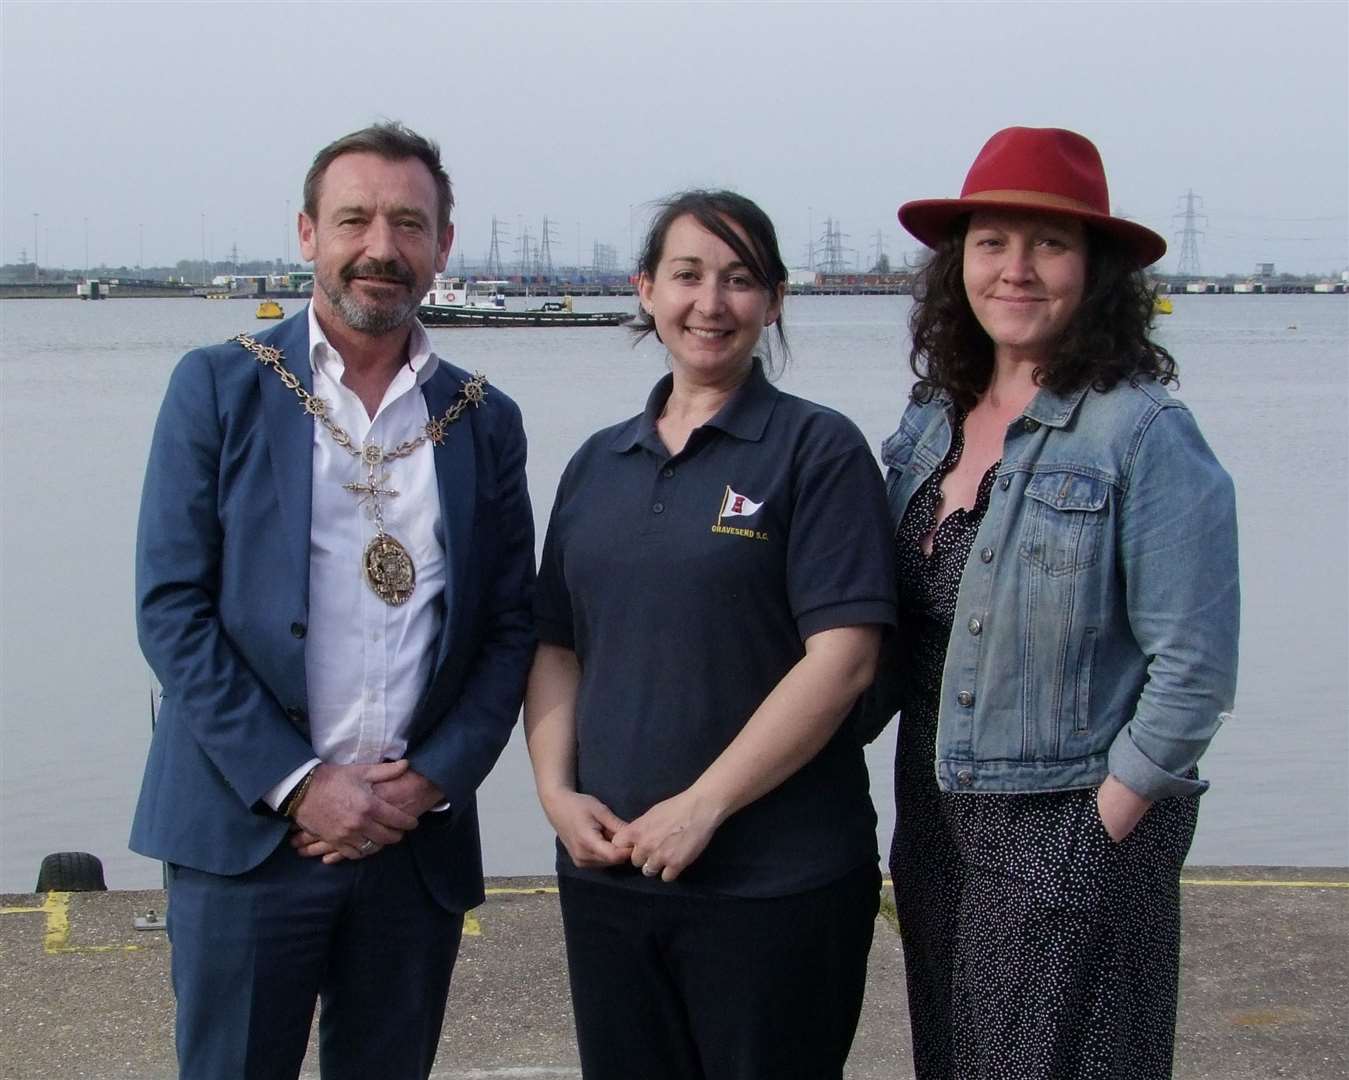 The mayor and mayoress of Gravesham, pictured with commodore Harriet Davies-Mullen, at Gravesend Sailing Club's sail-past.